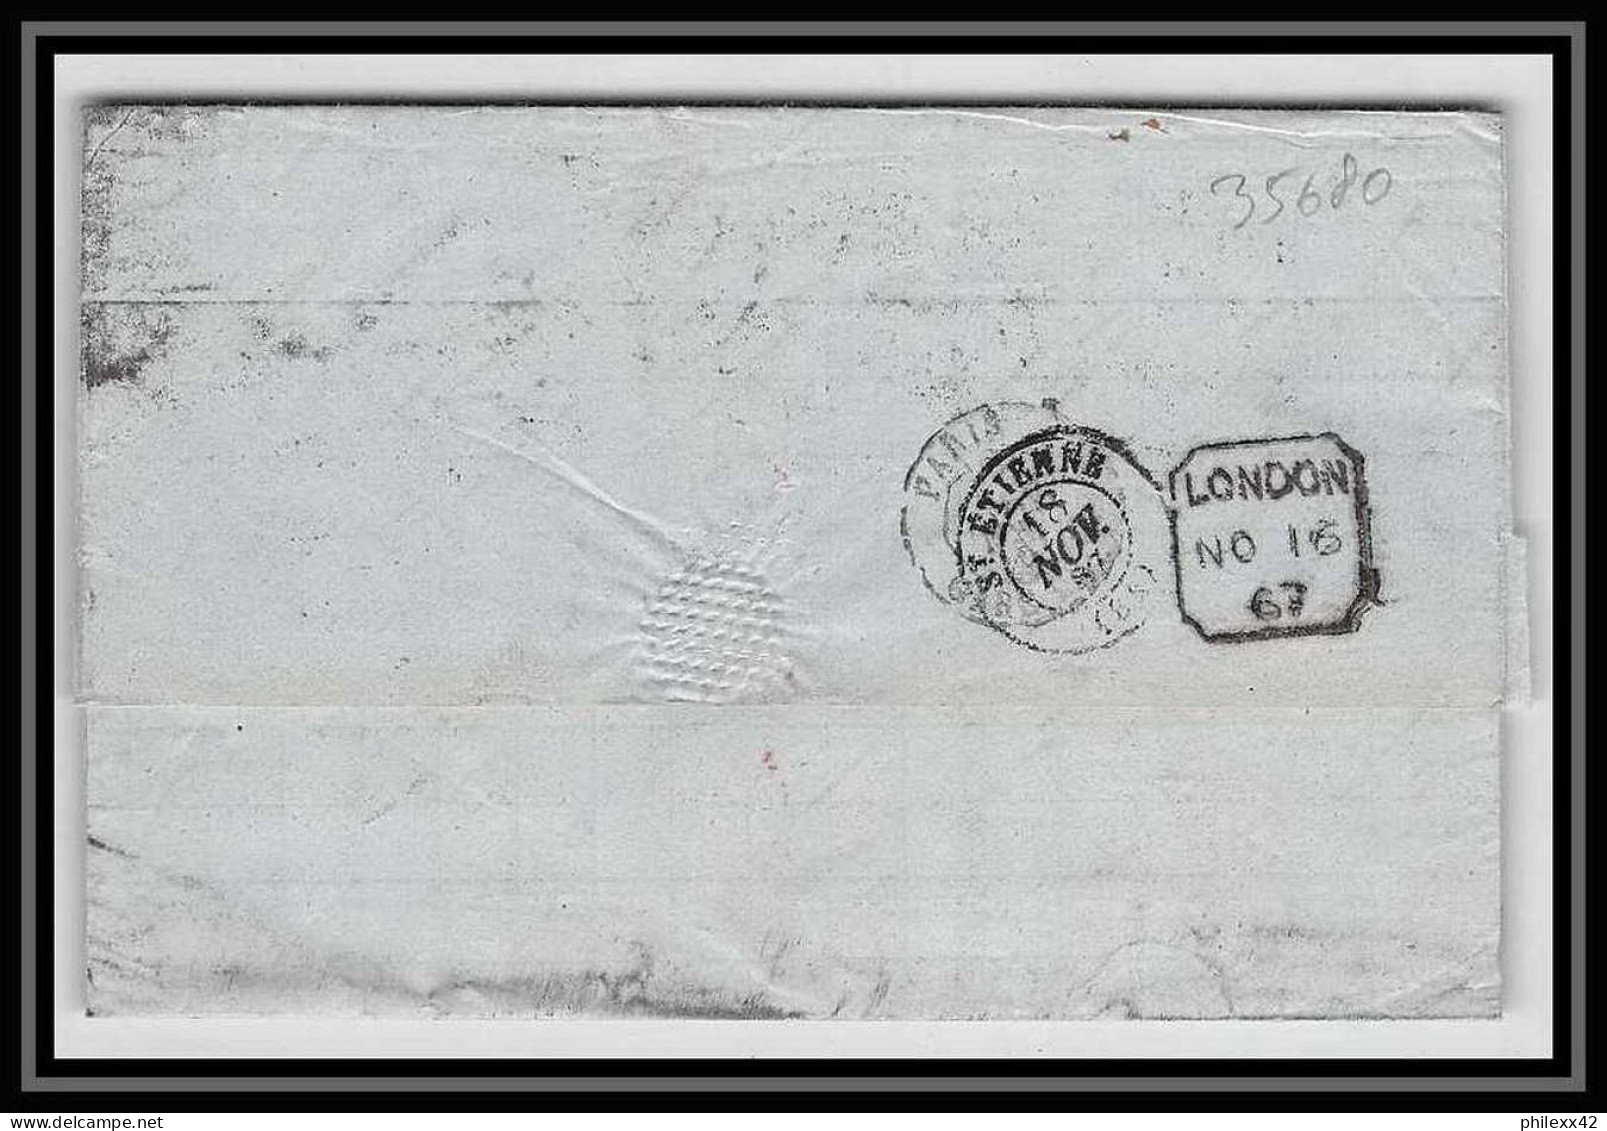 35680 N°32 Victoria 4p Red London St Etienne France 1868 Cachet 49 Lettre Cover Grande Bretagne England - Covers & Documents